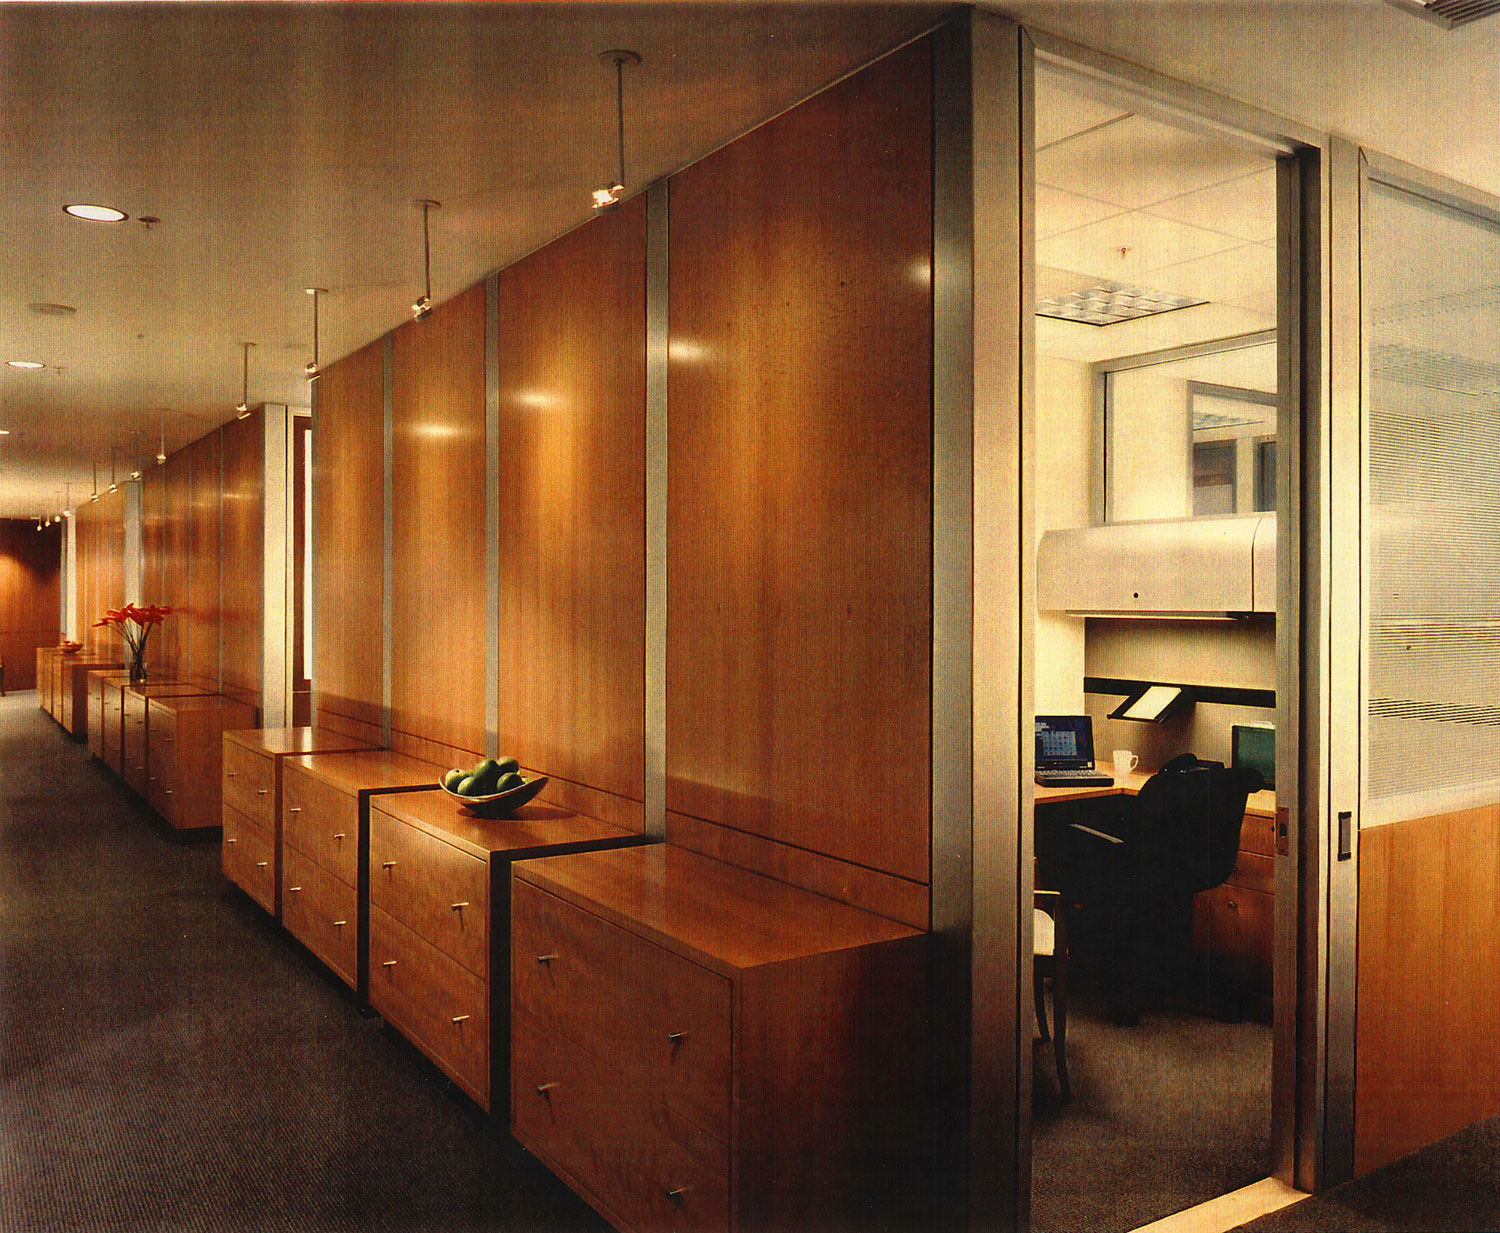  McKINSEY &amp; CO – Los Angeles, California  work completed for former employer  &nbsp;  Architect: Brayton &amp; Hughes Design Studio  Project Designer: Timothy Gemmill  Project Type: Private Offices 